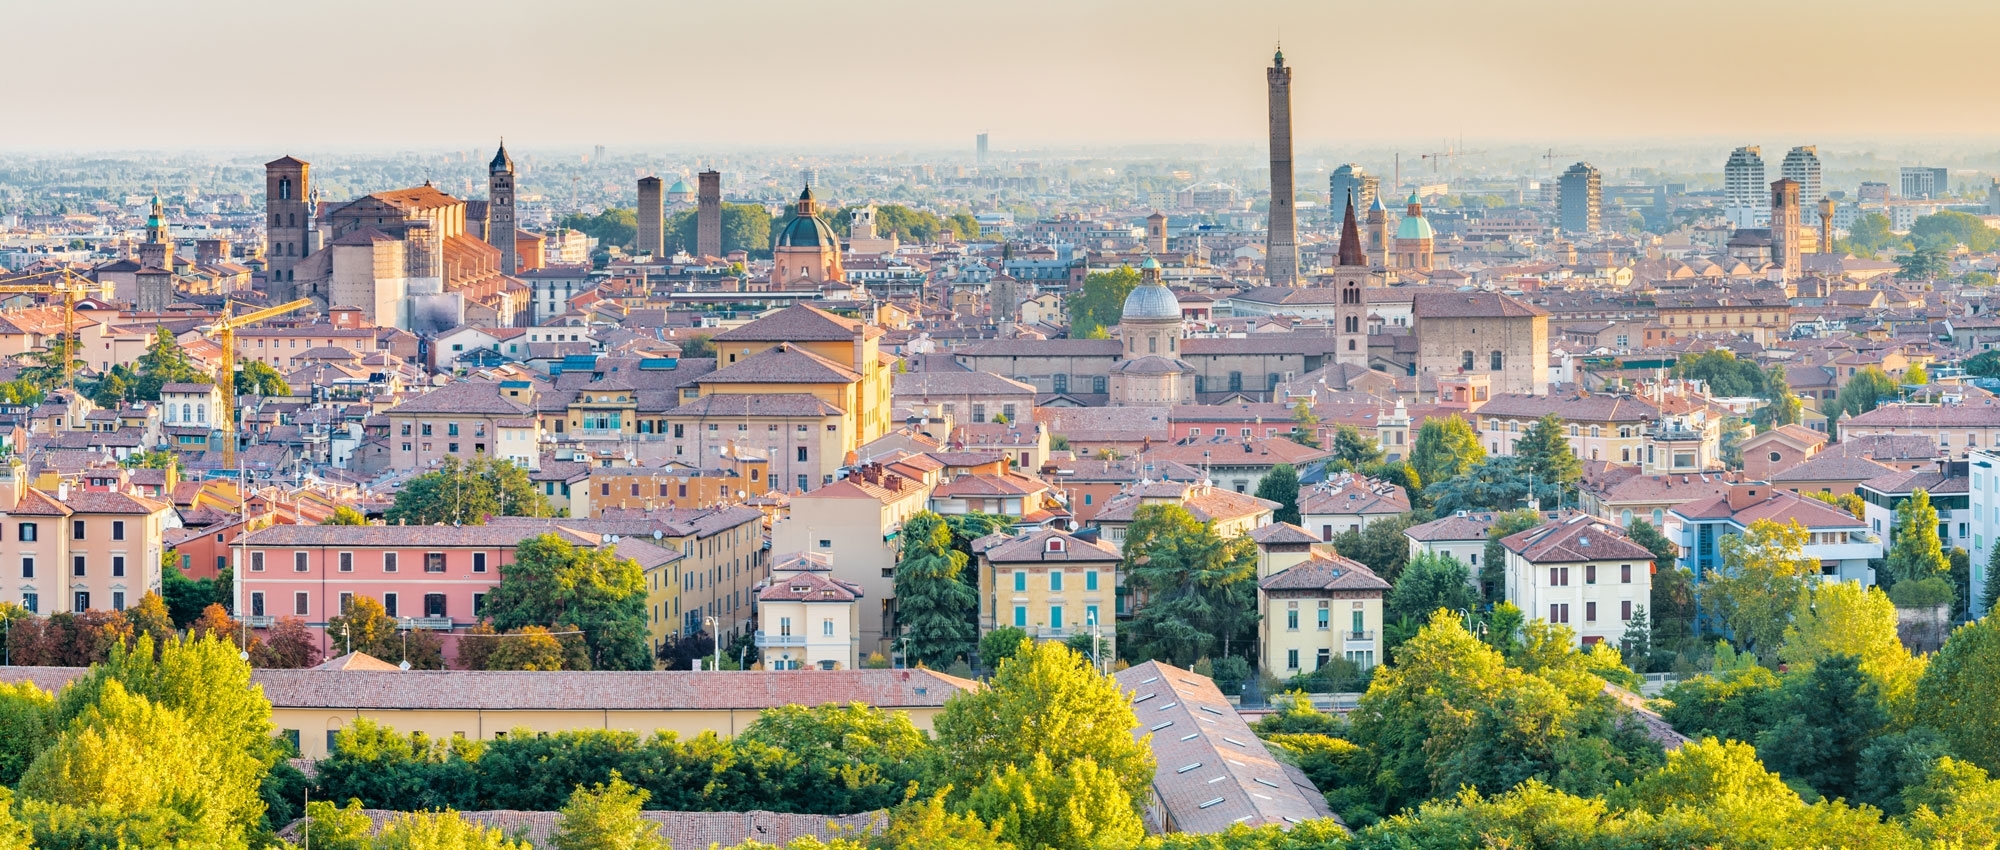 62 Fun & Unusual Things To Do In Bologna, Italy